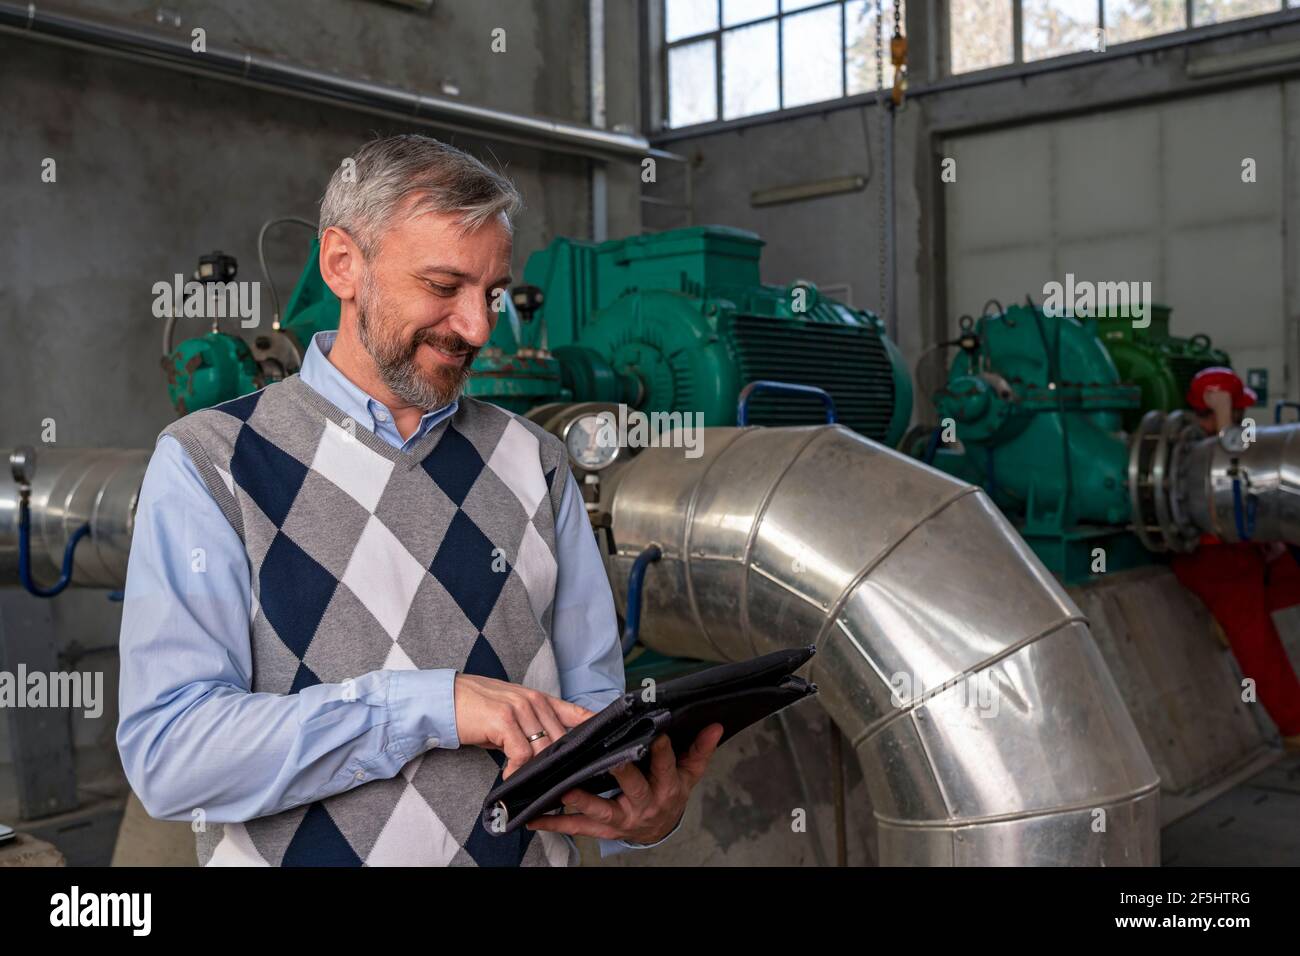 Business Person Using Digital Tablet Inside Factory Hall. Engineer Standing in District Heating Power Plant. Digital Technology Concept. Industry 4.0 Stock Photo